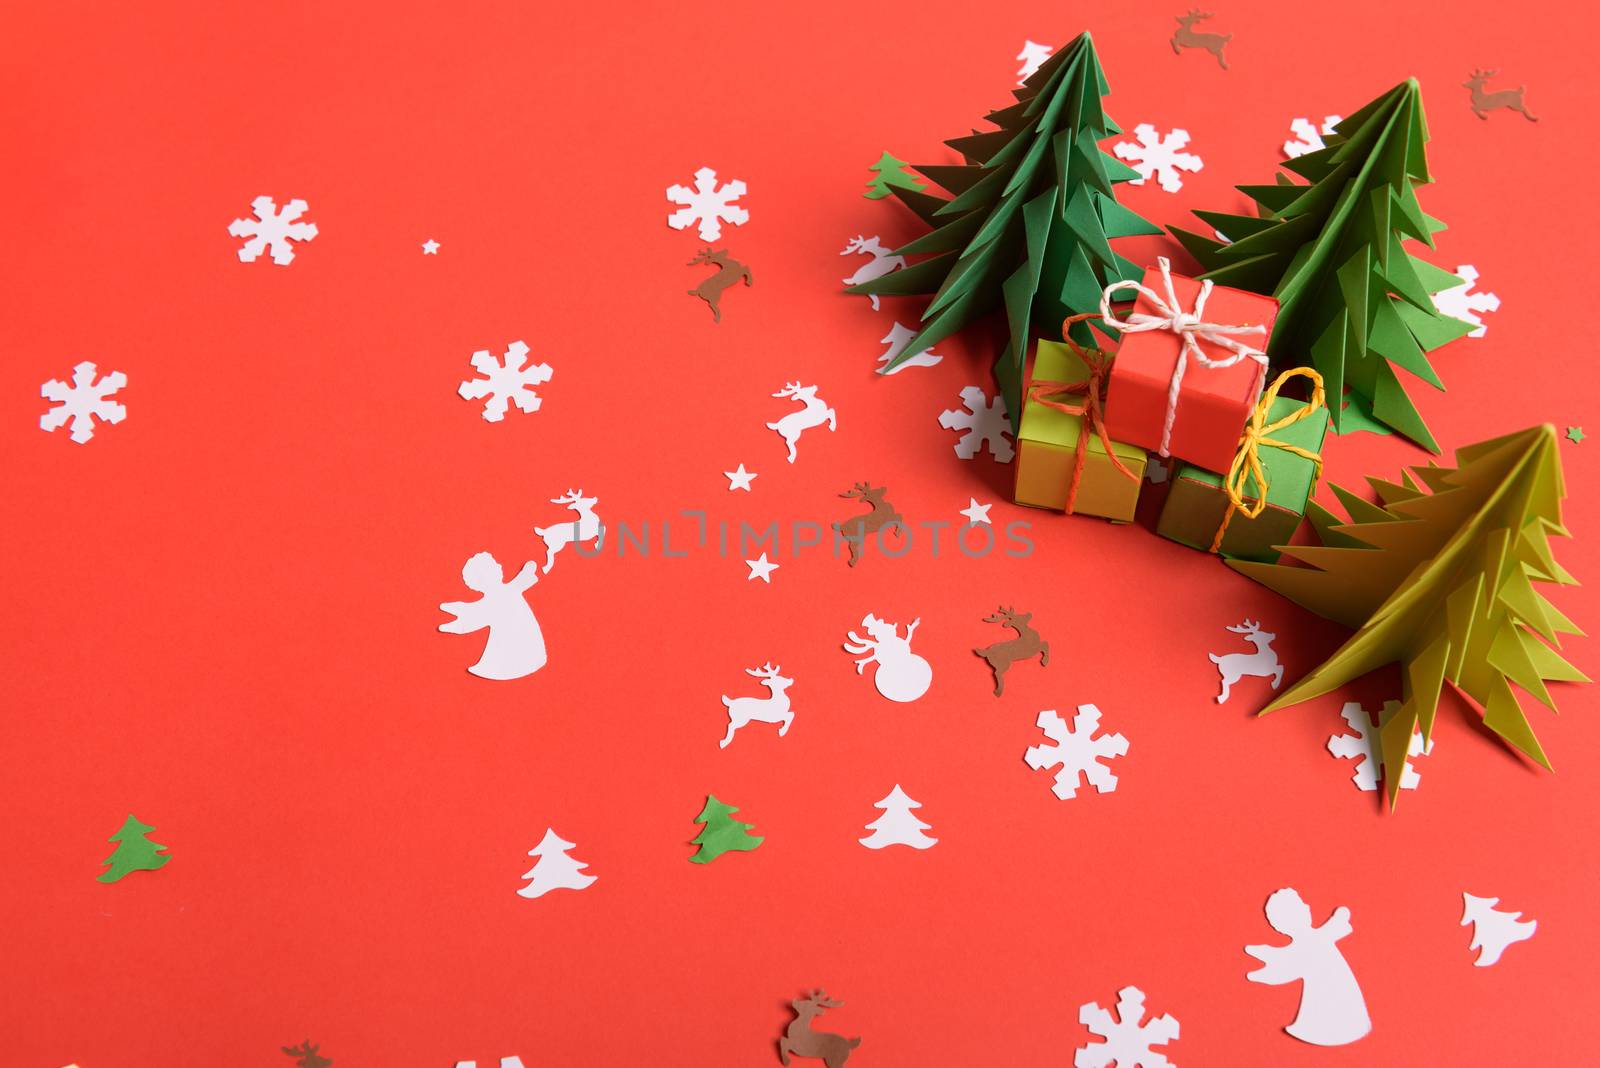 Christmas or New Year background, plain composition made of Xmas decorations and fir branches, flat lay, blank space for a greeting text.